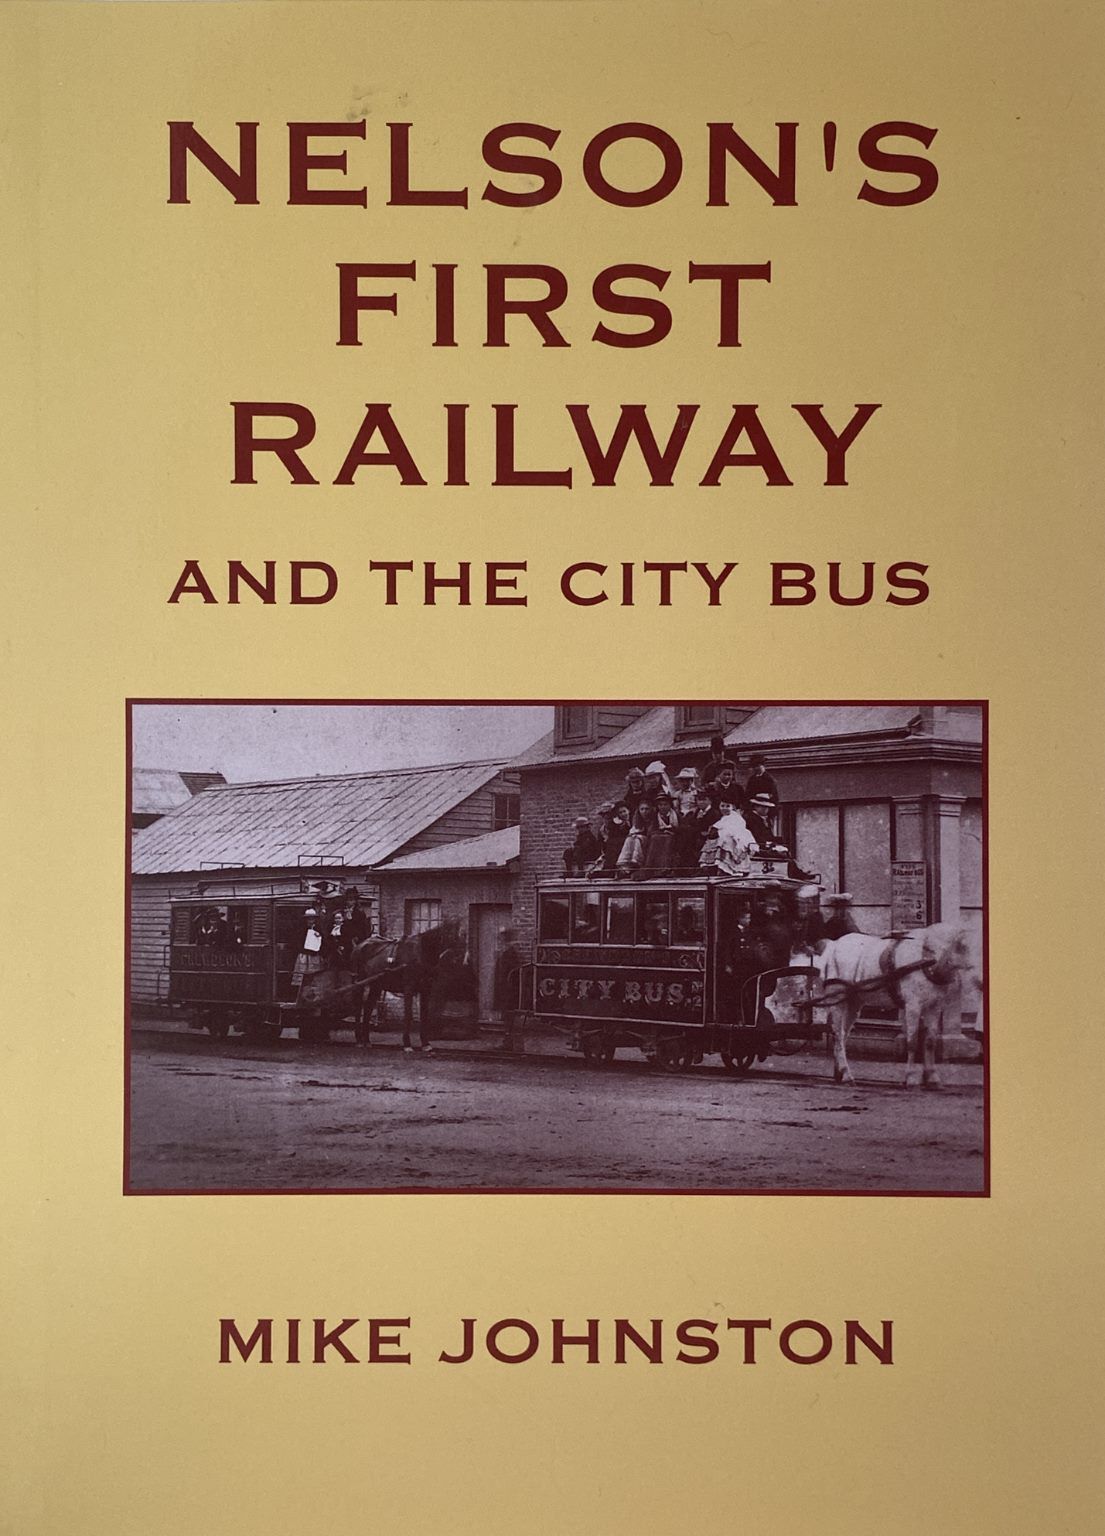 NELSON'S FIRST RAILWAY and the City Bus